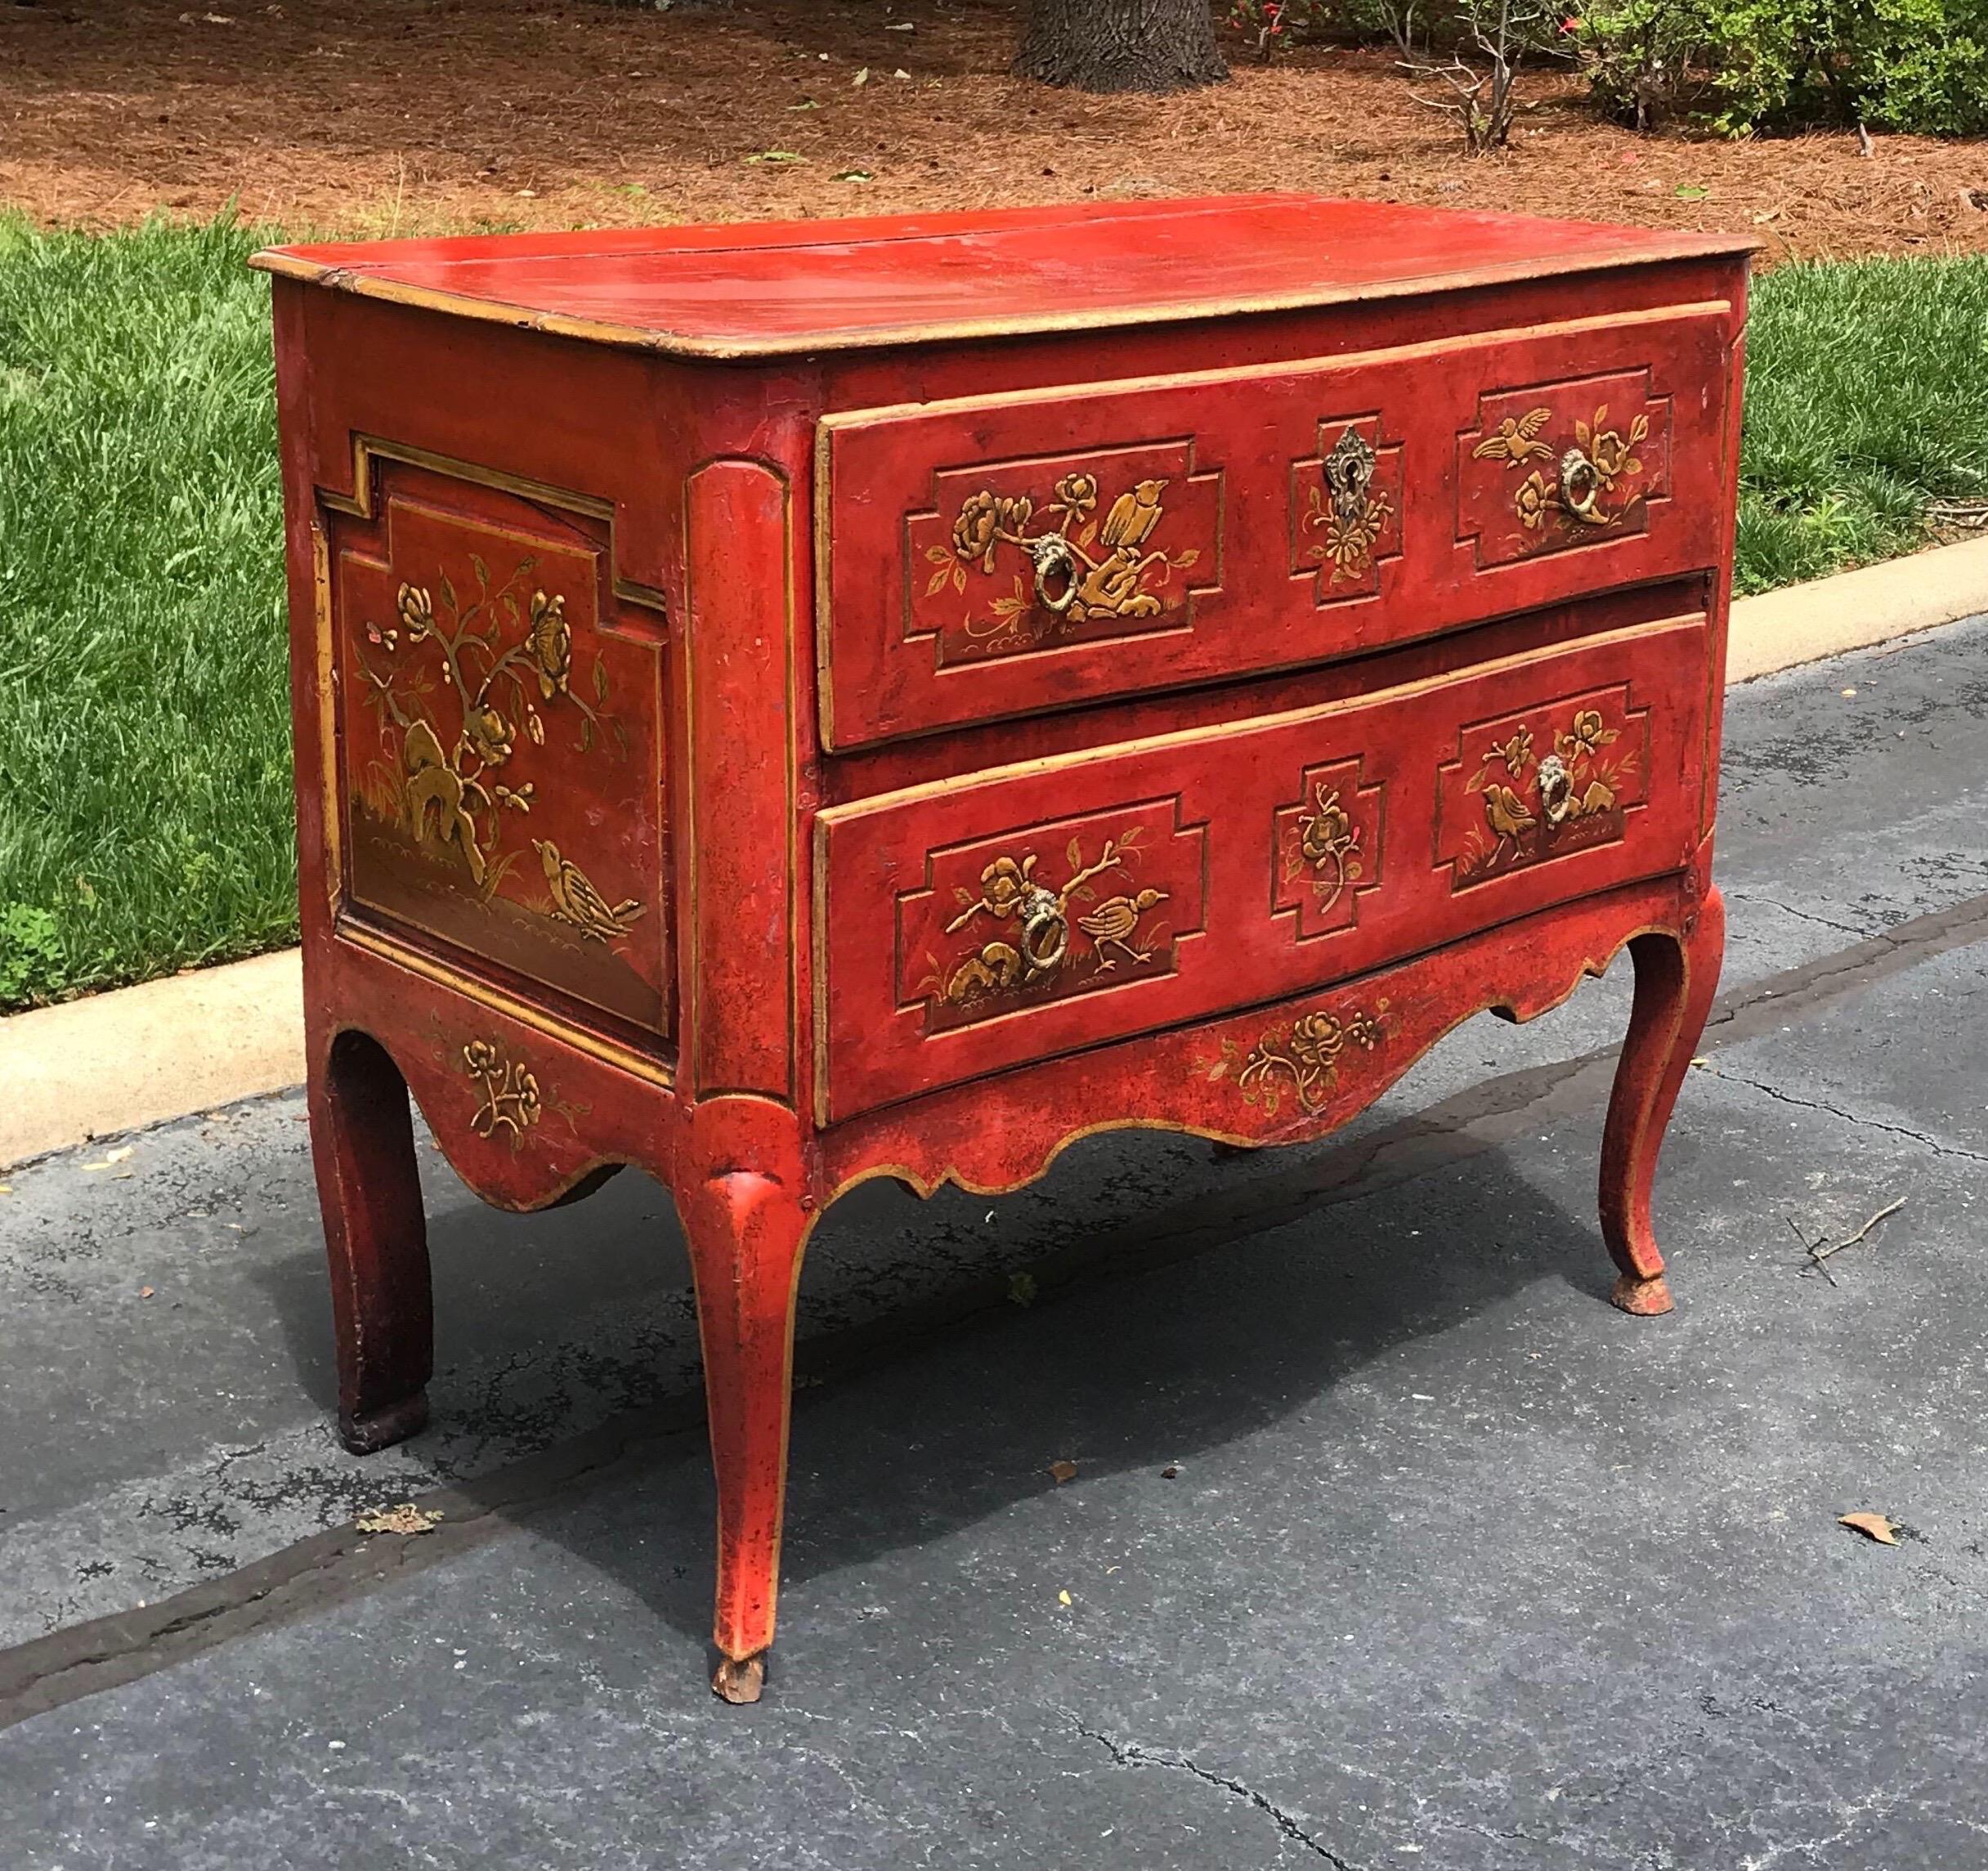 Incredible red lacquered Italian chinoiserie 2 drawer commode with paneled sides and shaped top in a serpentine form.